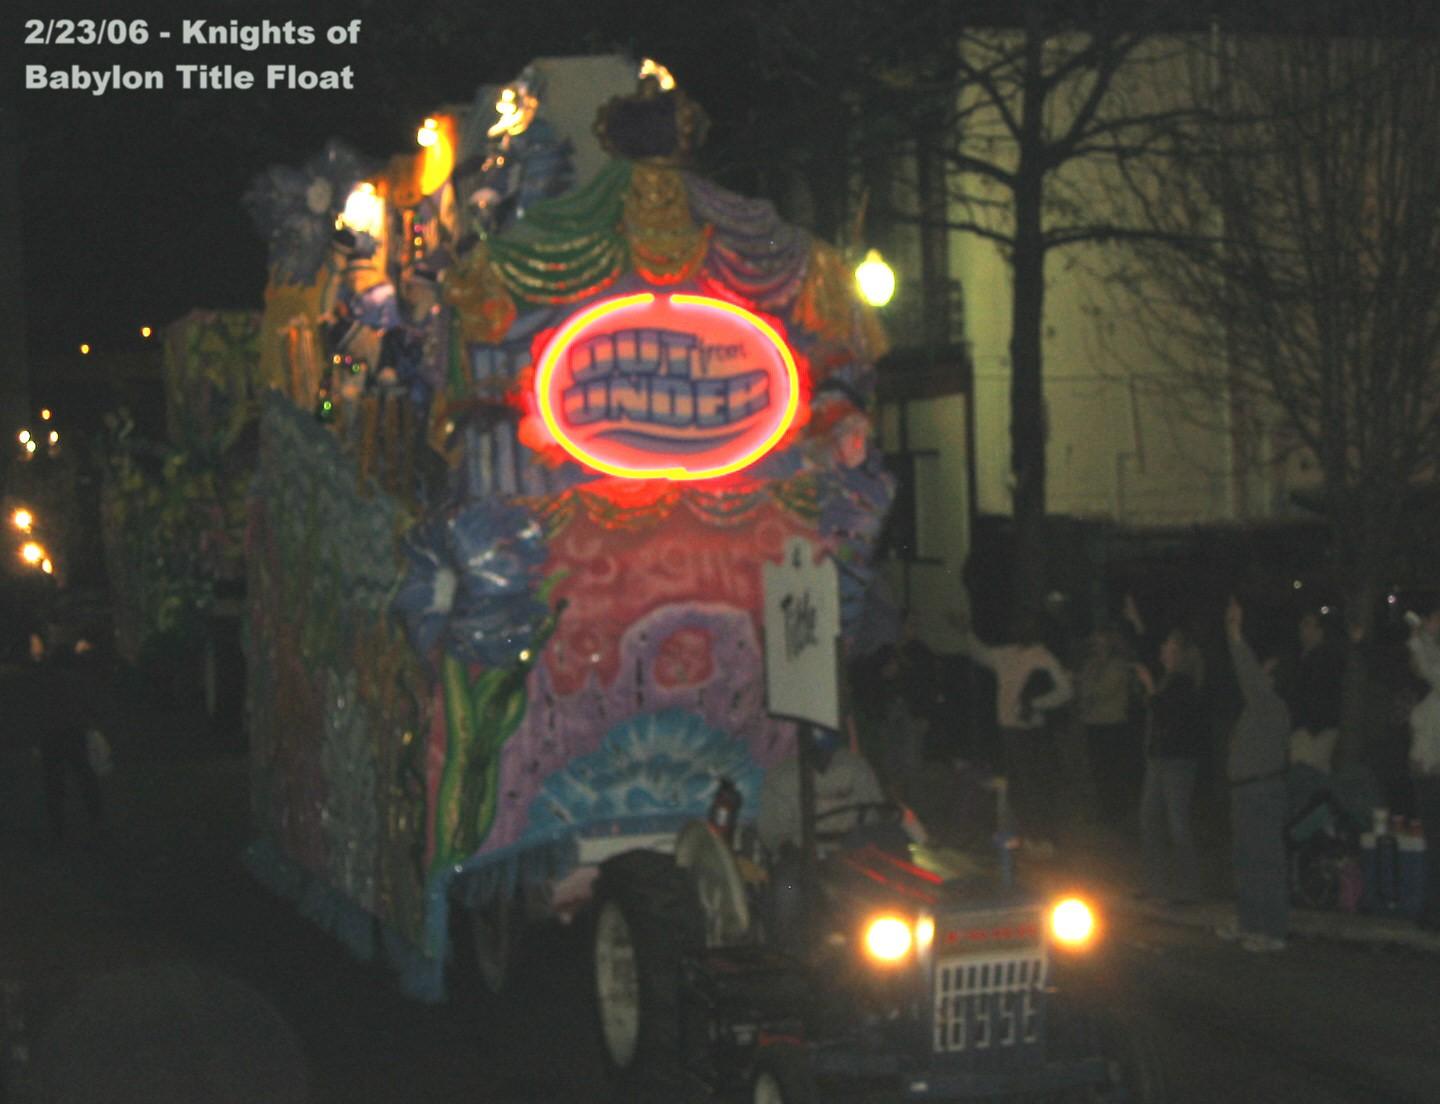 Knights of Babylon Title Float